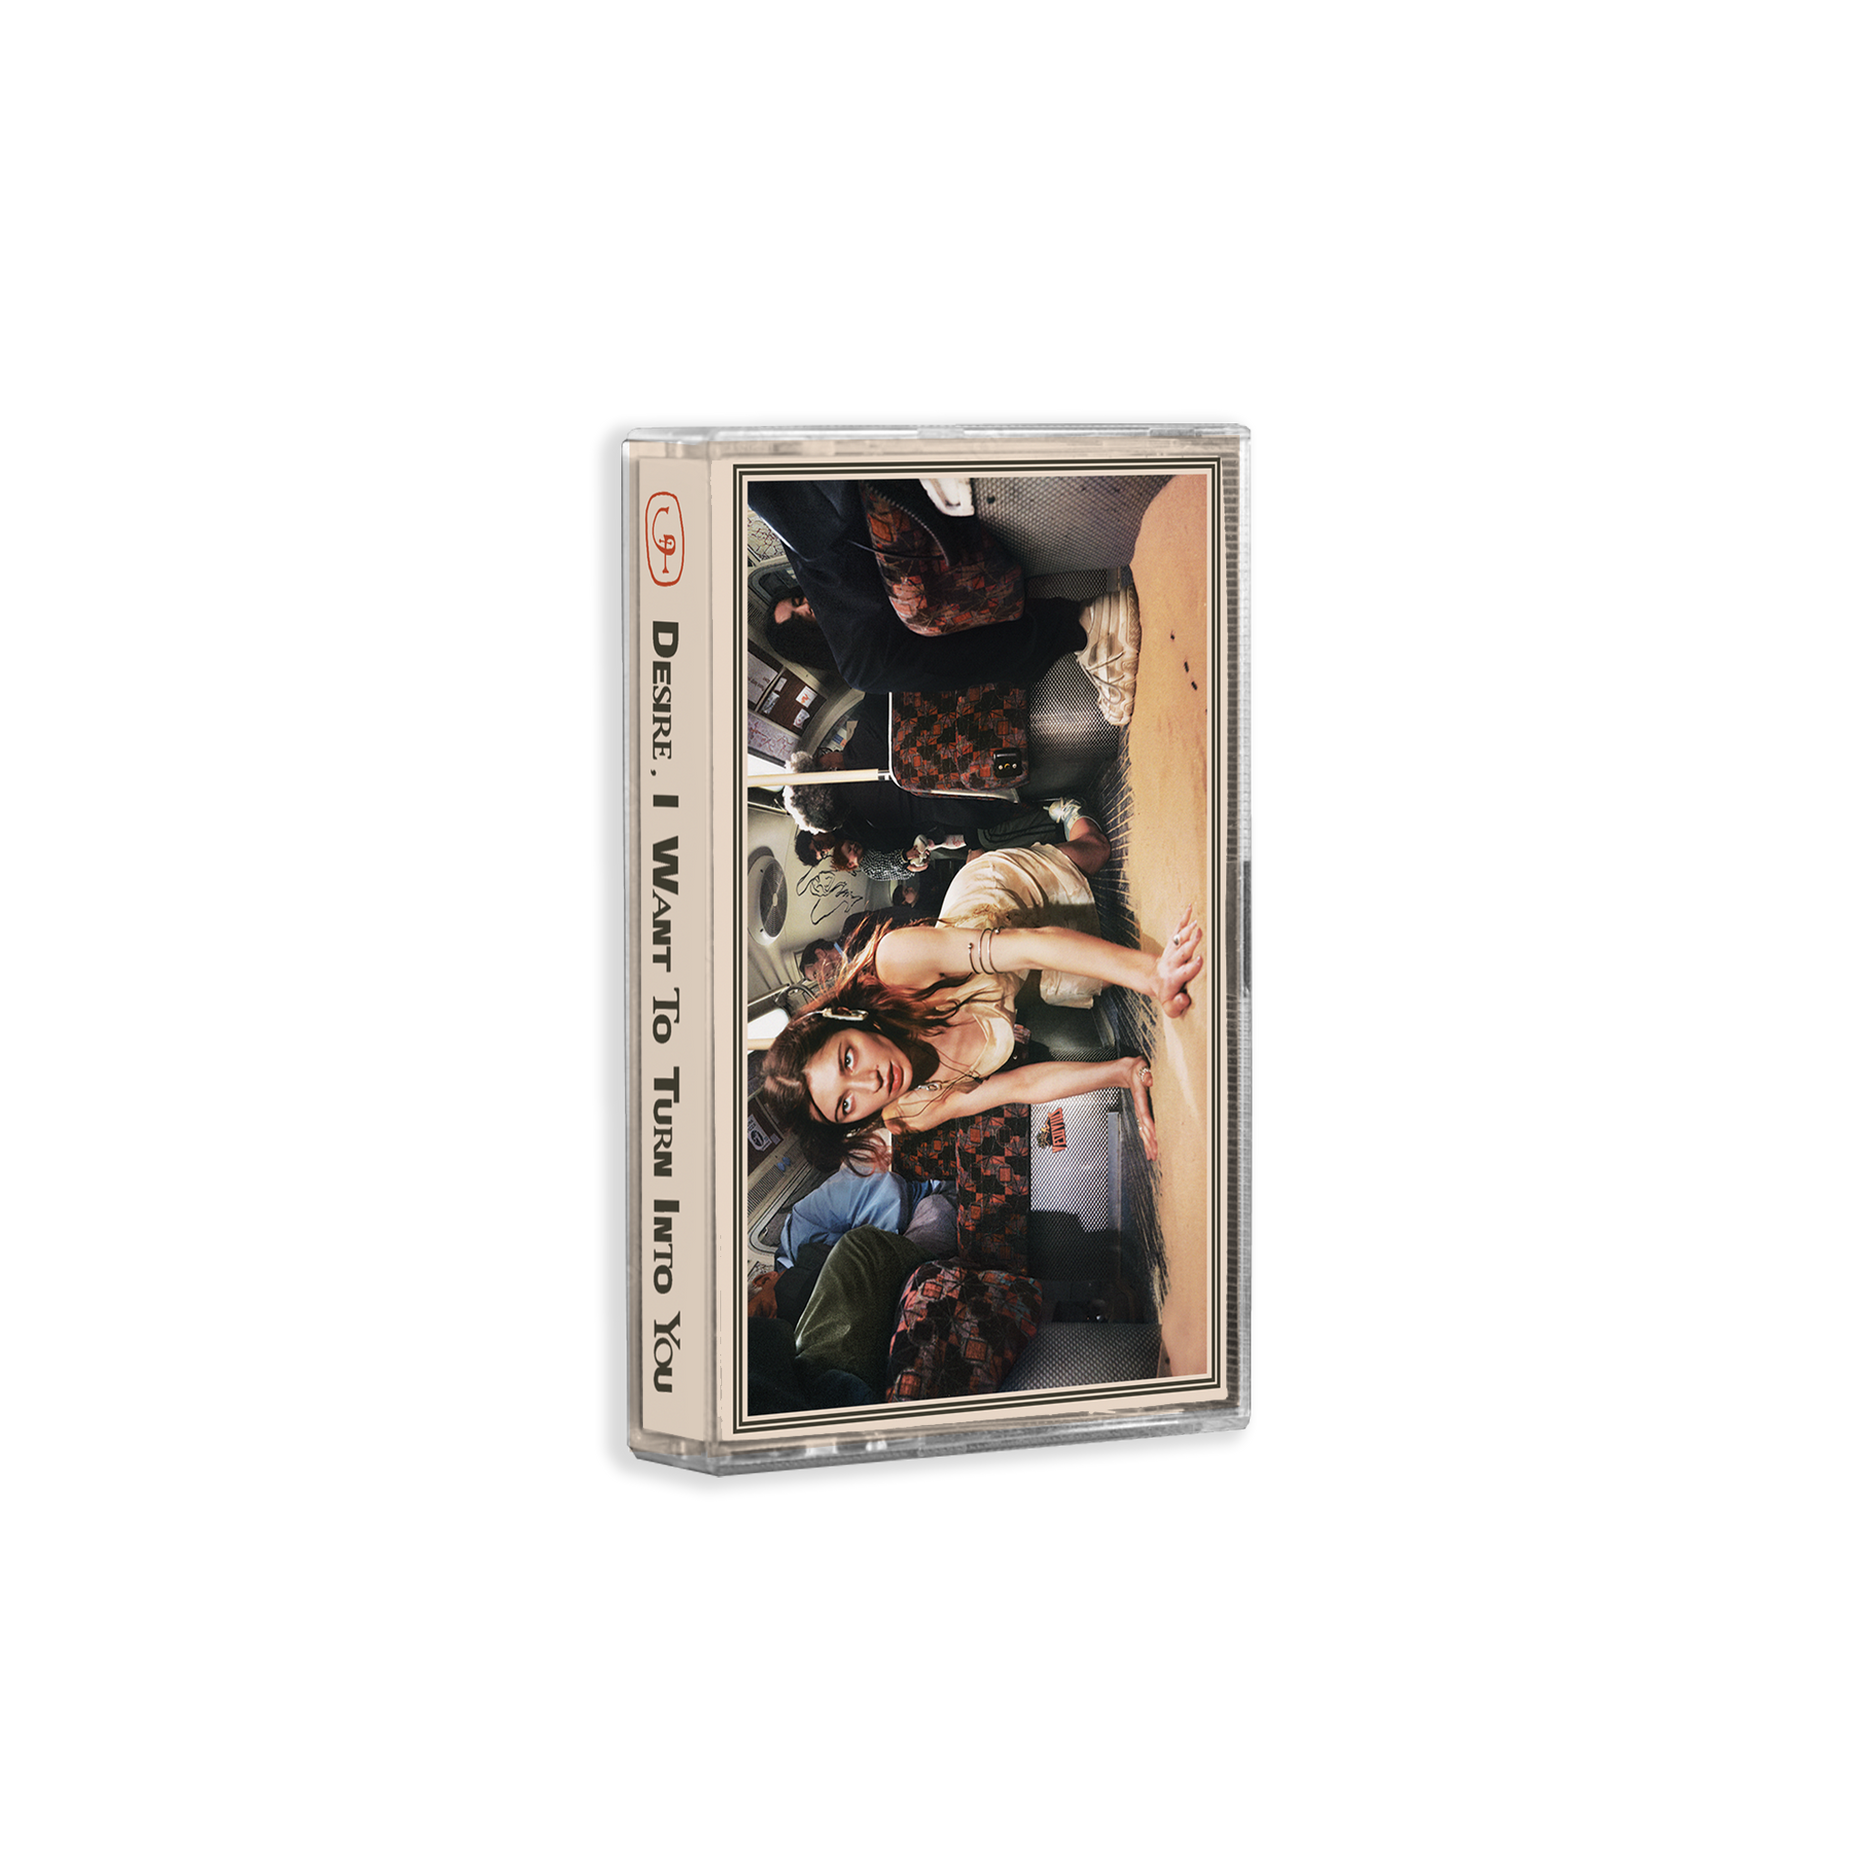 Desire, I Want To Turn Into You Cassette